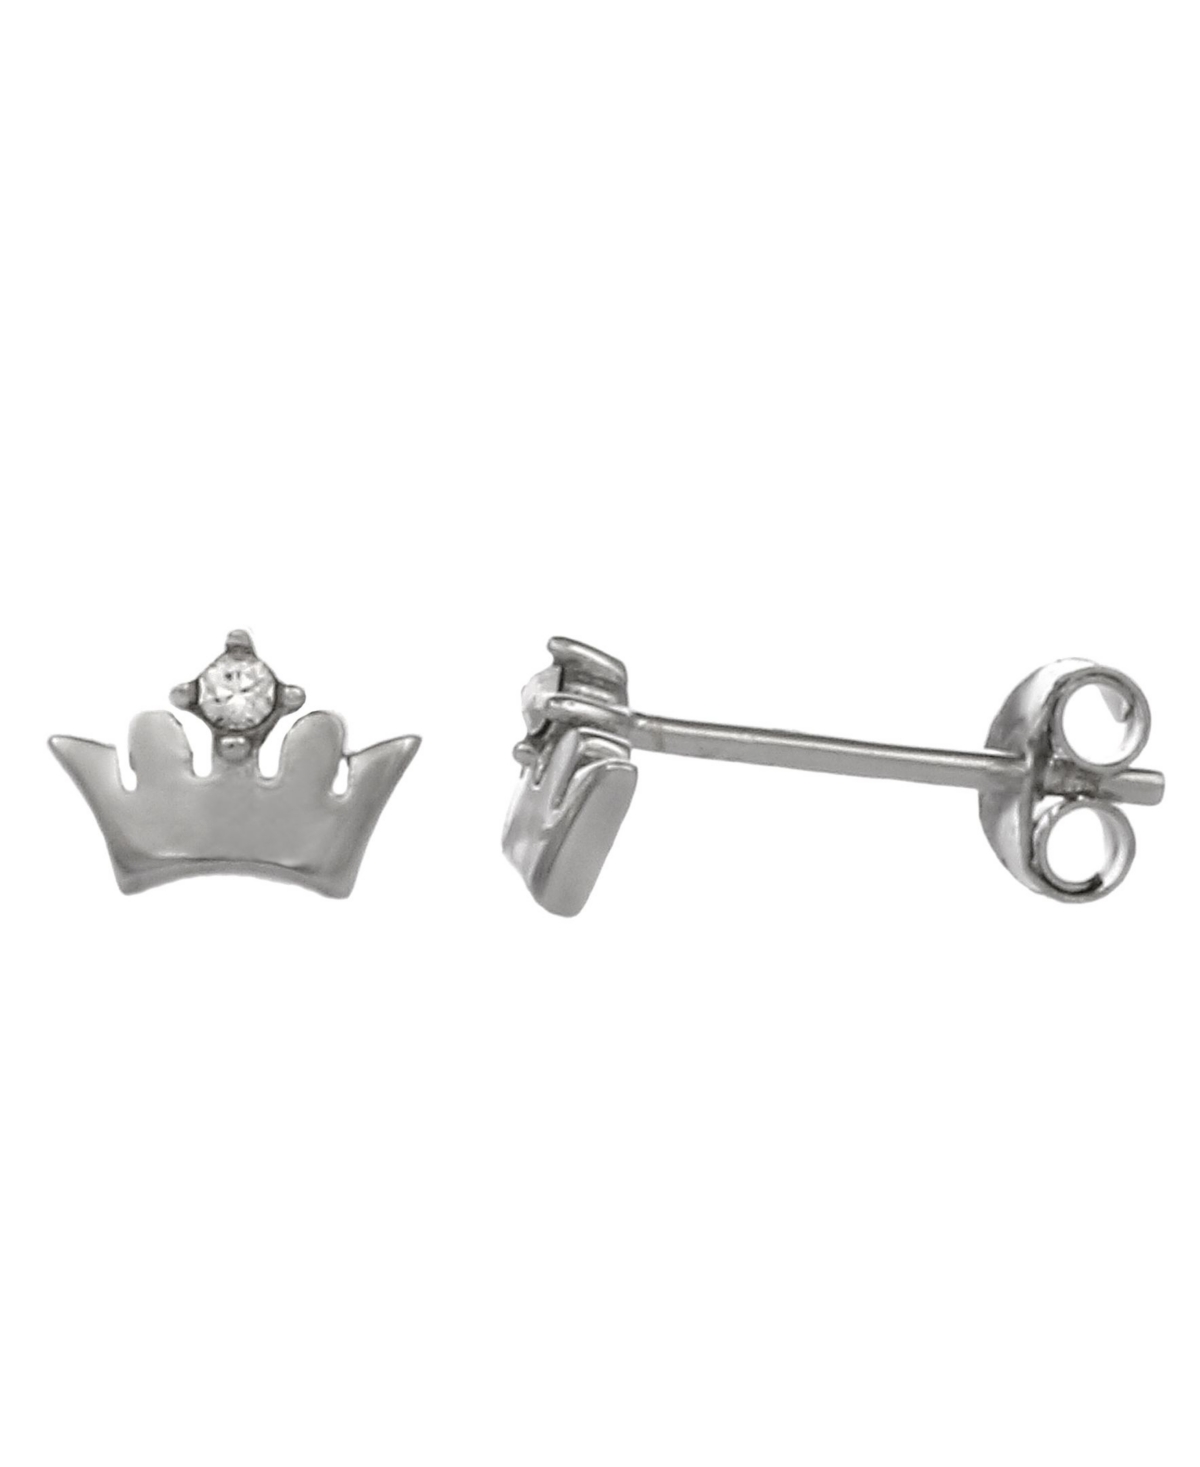 Women's Sterling Silver Crown Stud Earrings with Crystal Stone Accent - Silver-Tone